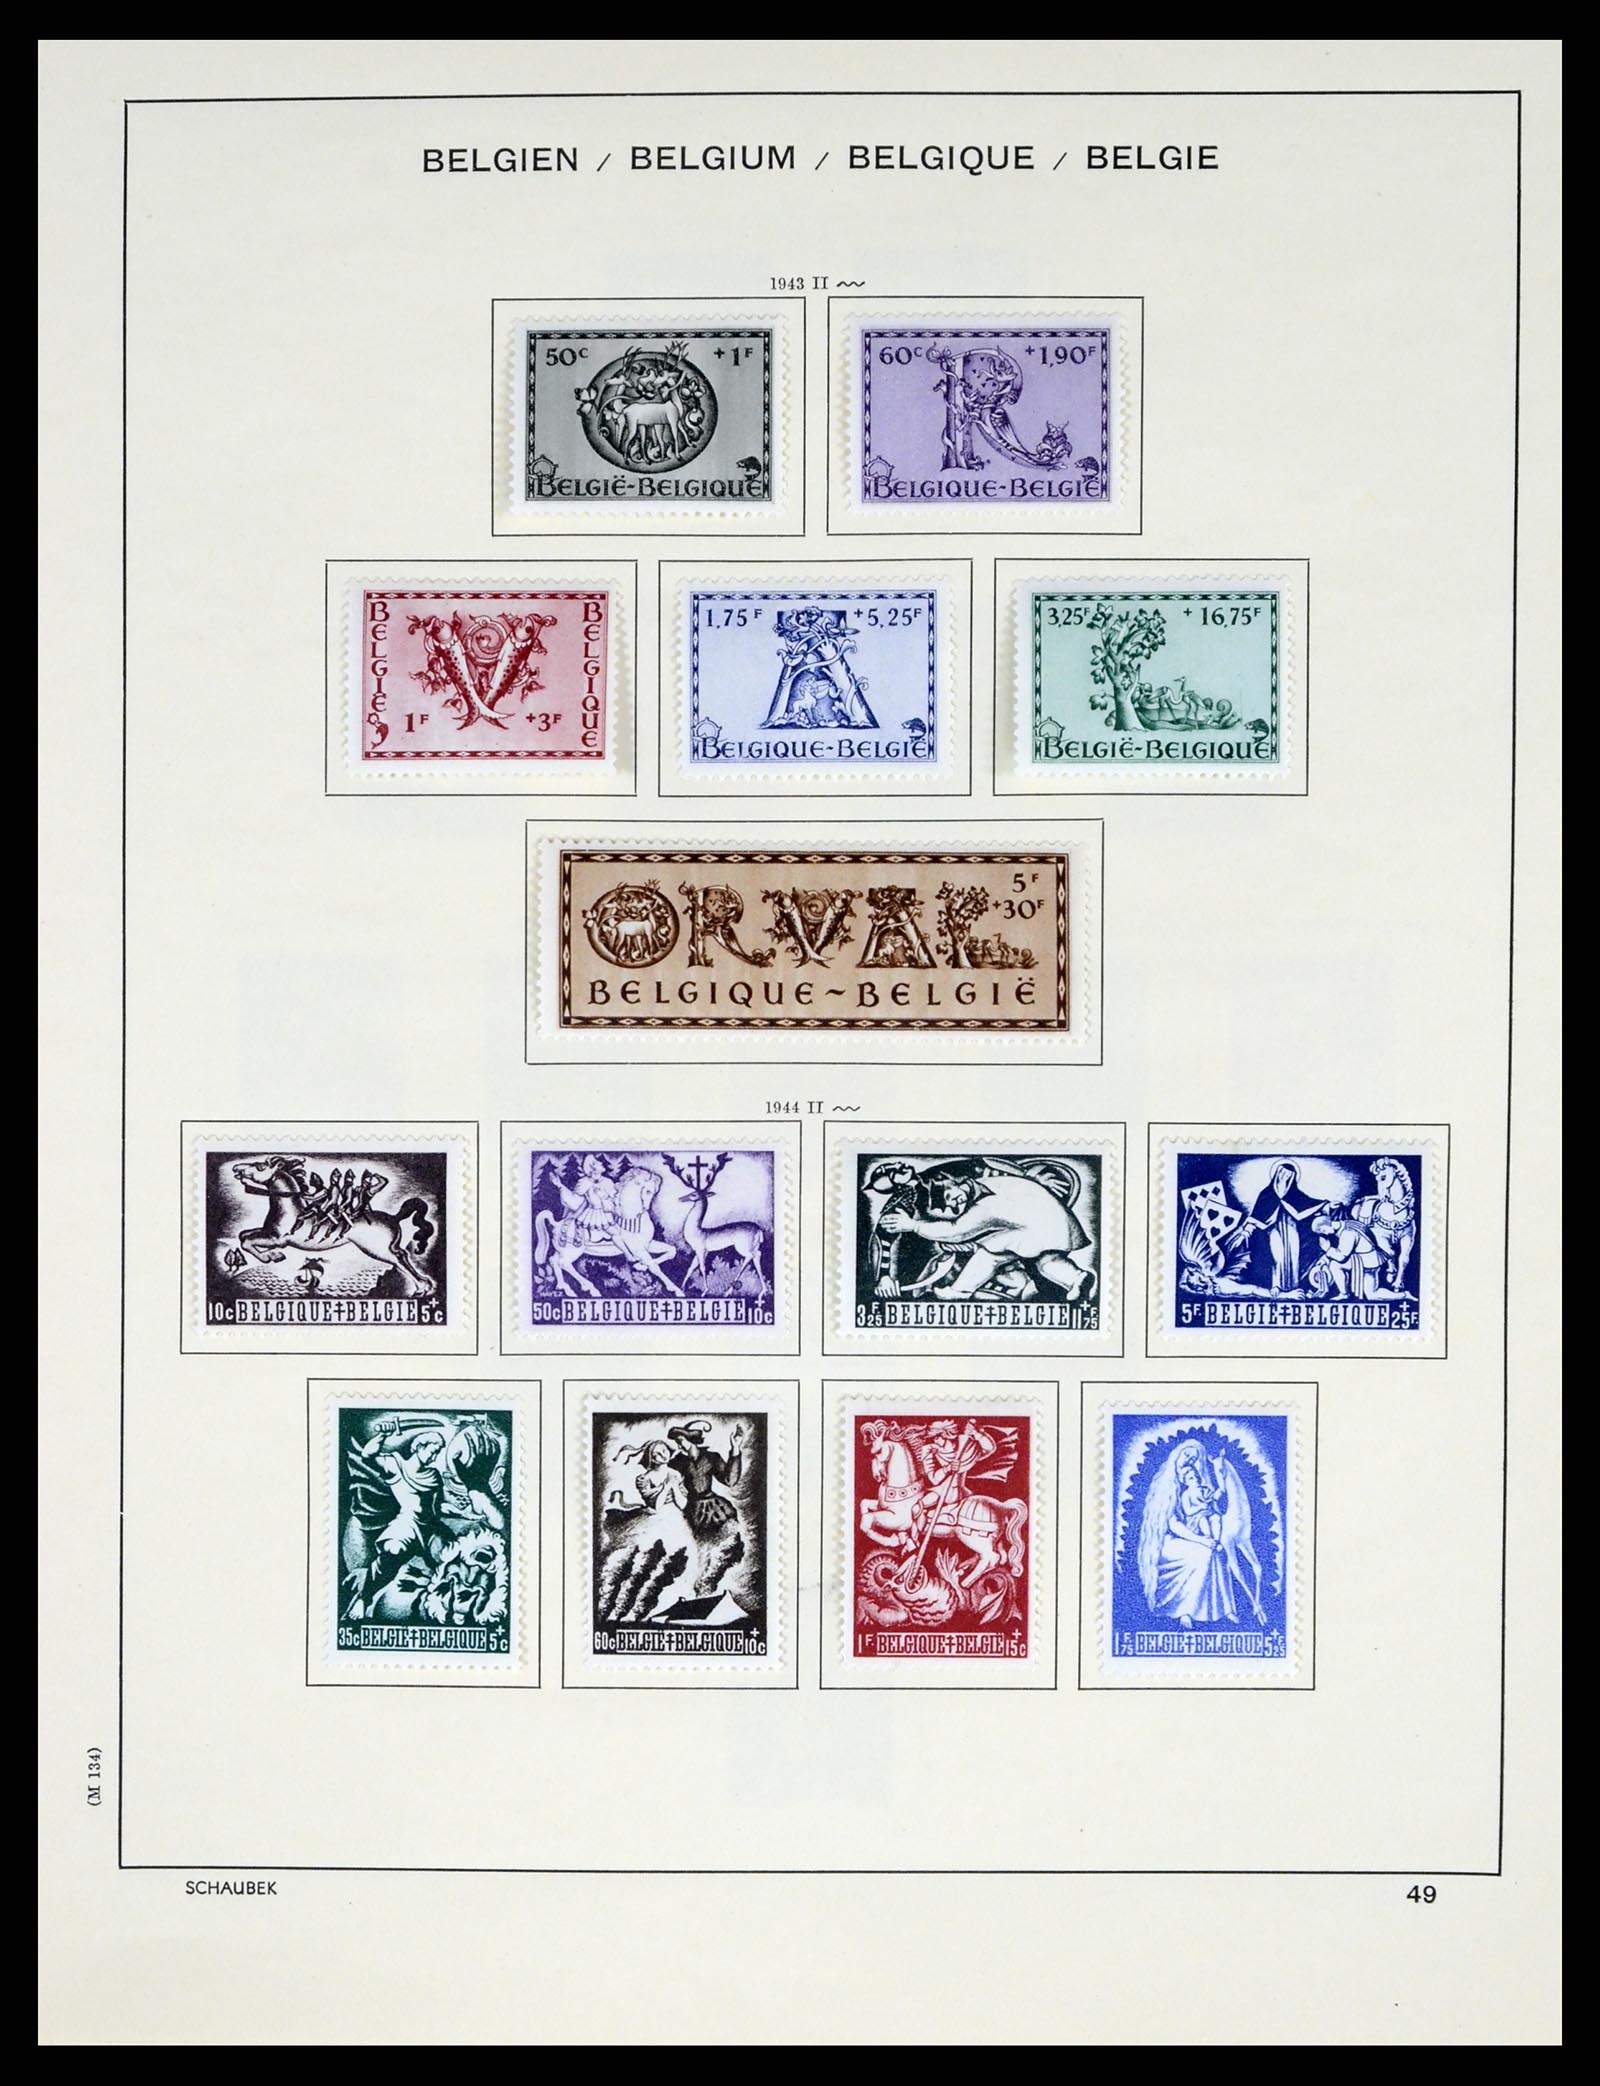 37595 057 - Stamp collection 37595 Super collection Belgium 1849-2015!